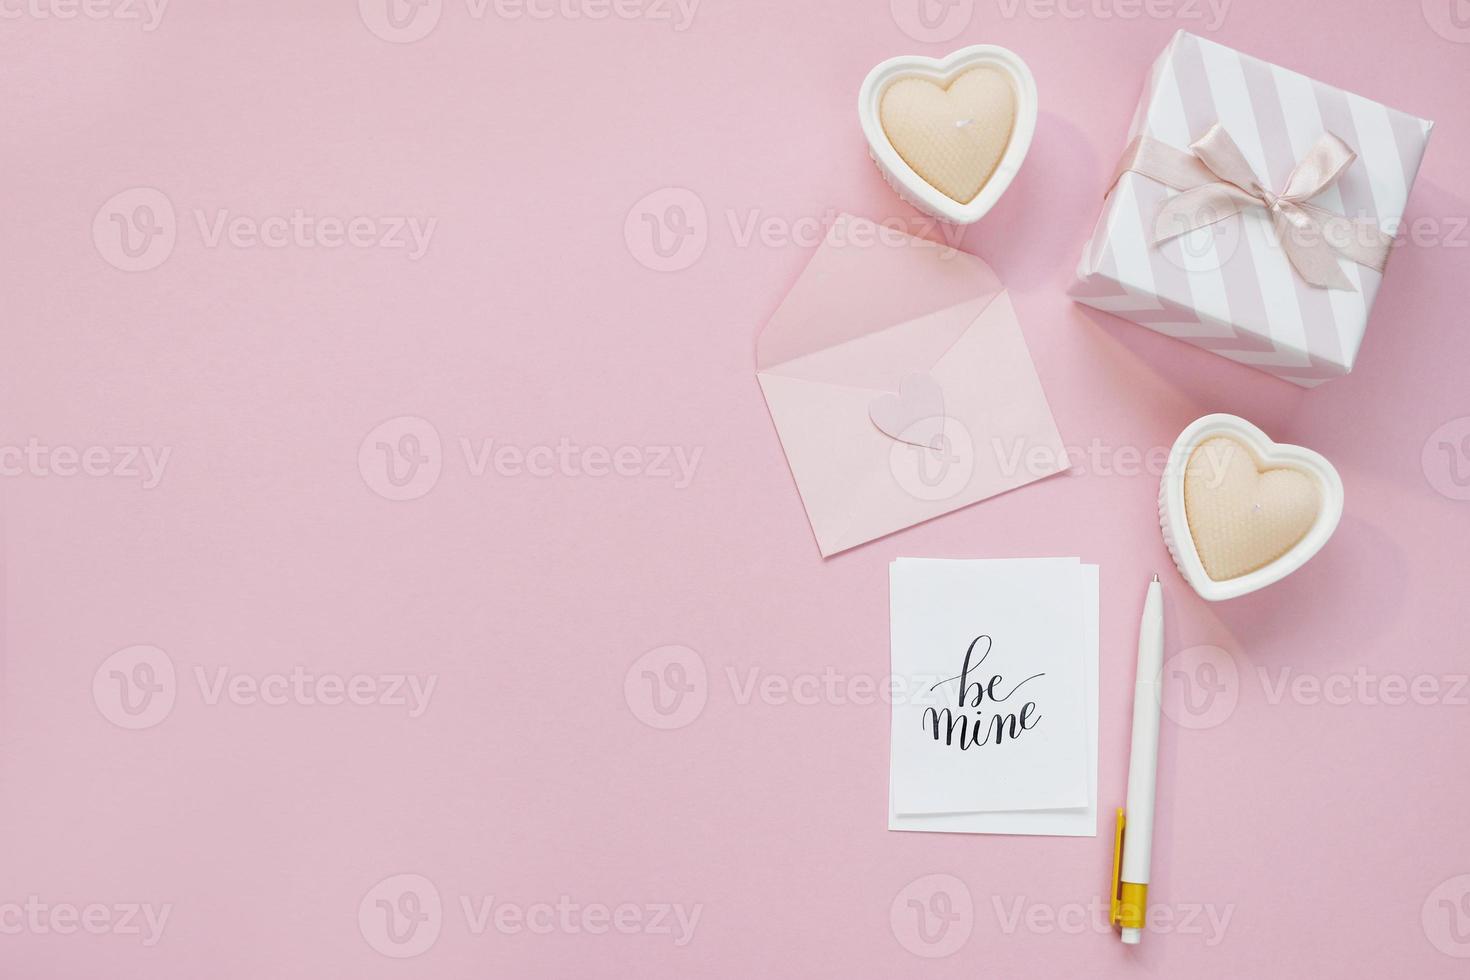 Happy Valentines Day composition. Blank greeting card mockup, gift boxes, hearts, confetti on pink background photo